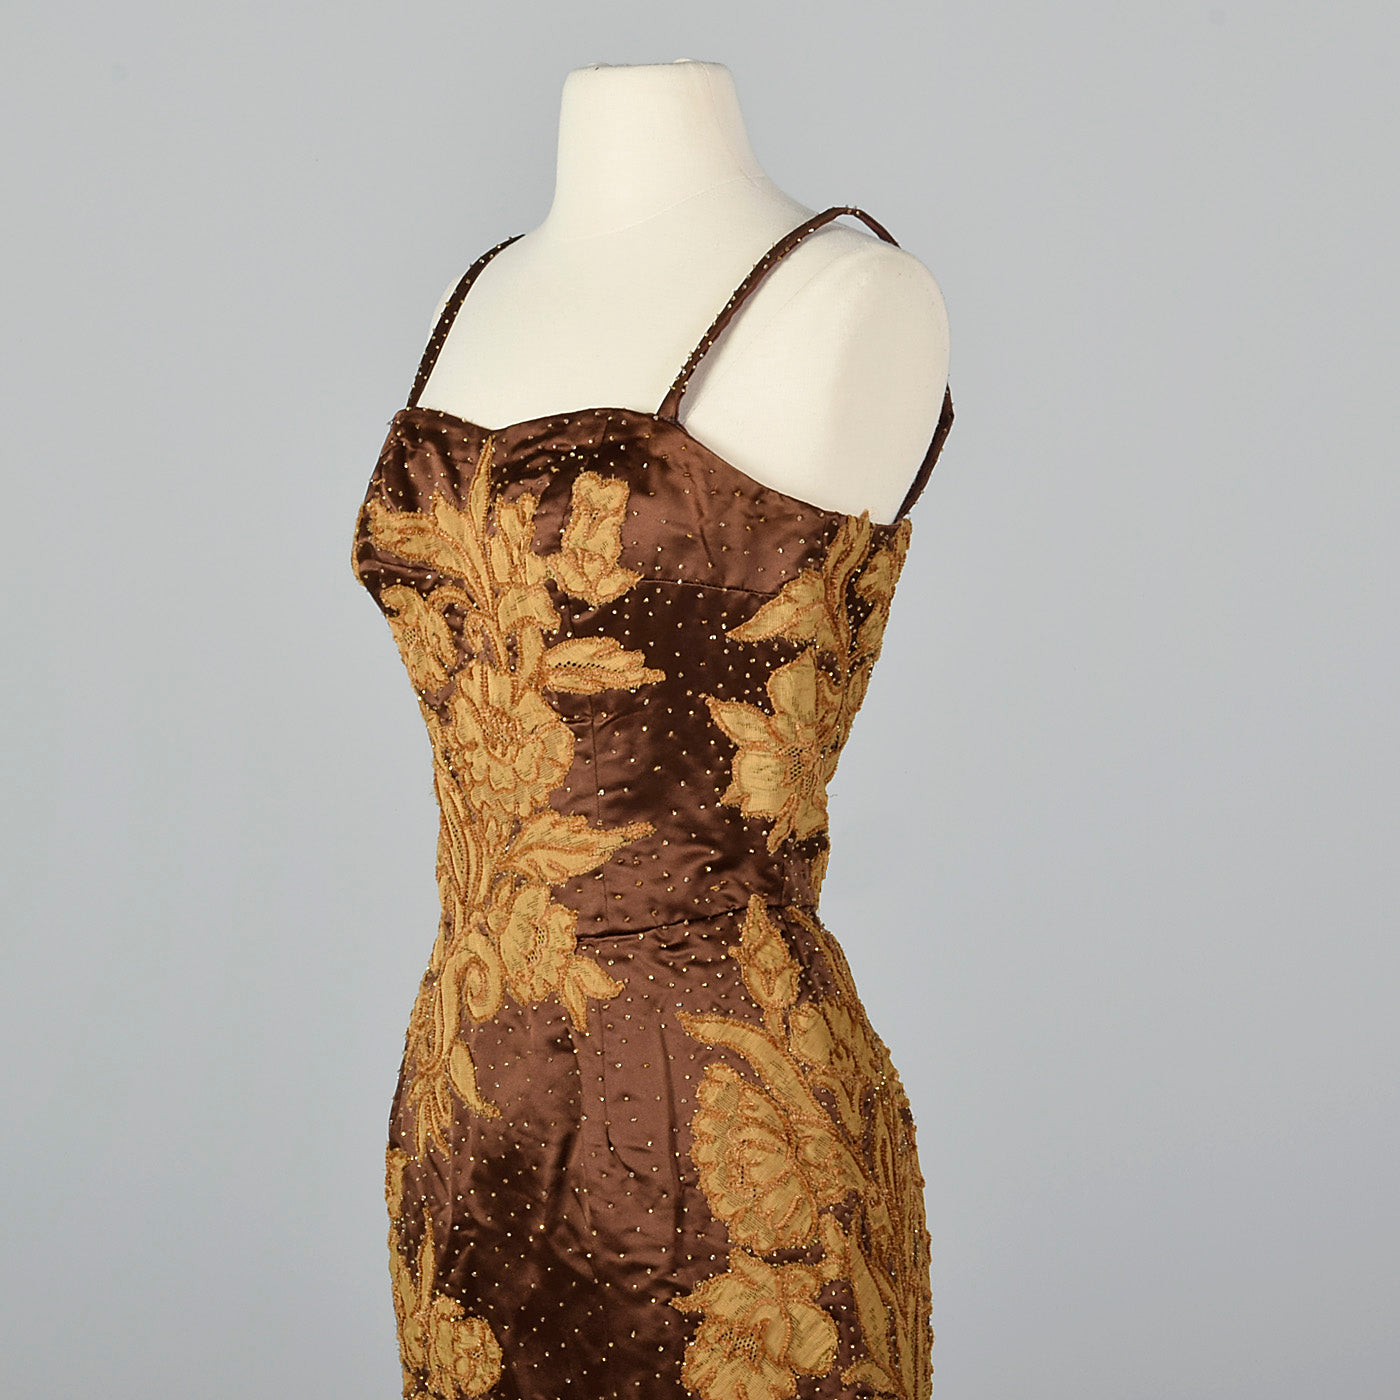 1950s Brown Dress with Lace Applique